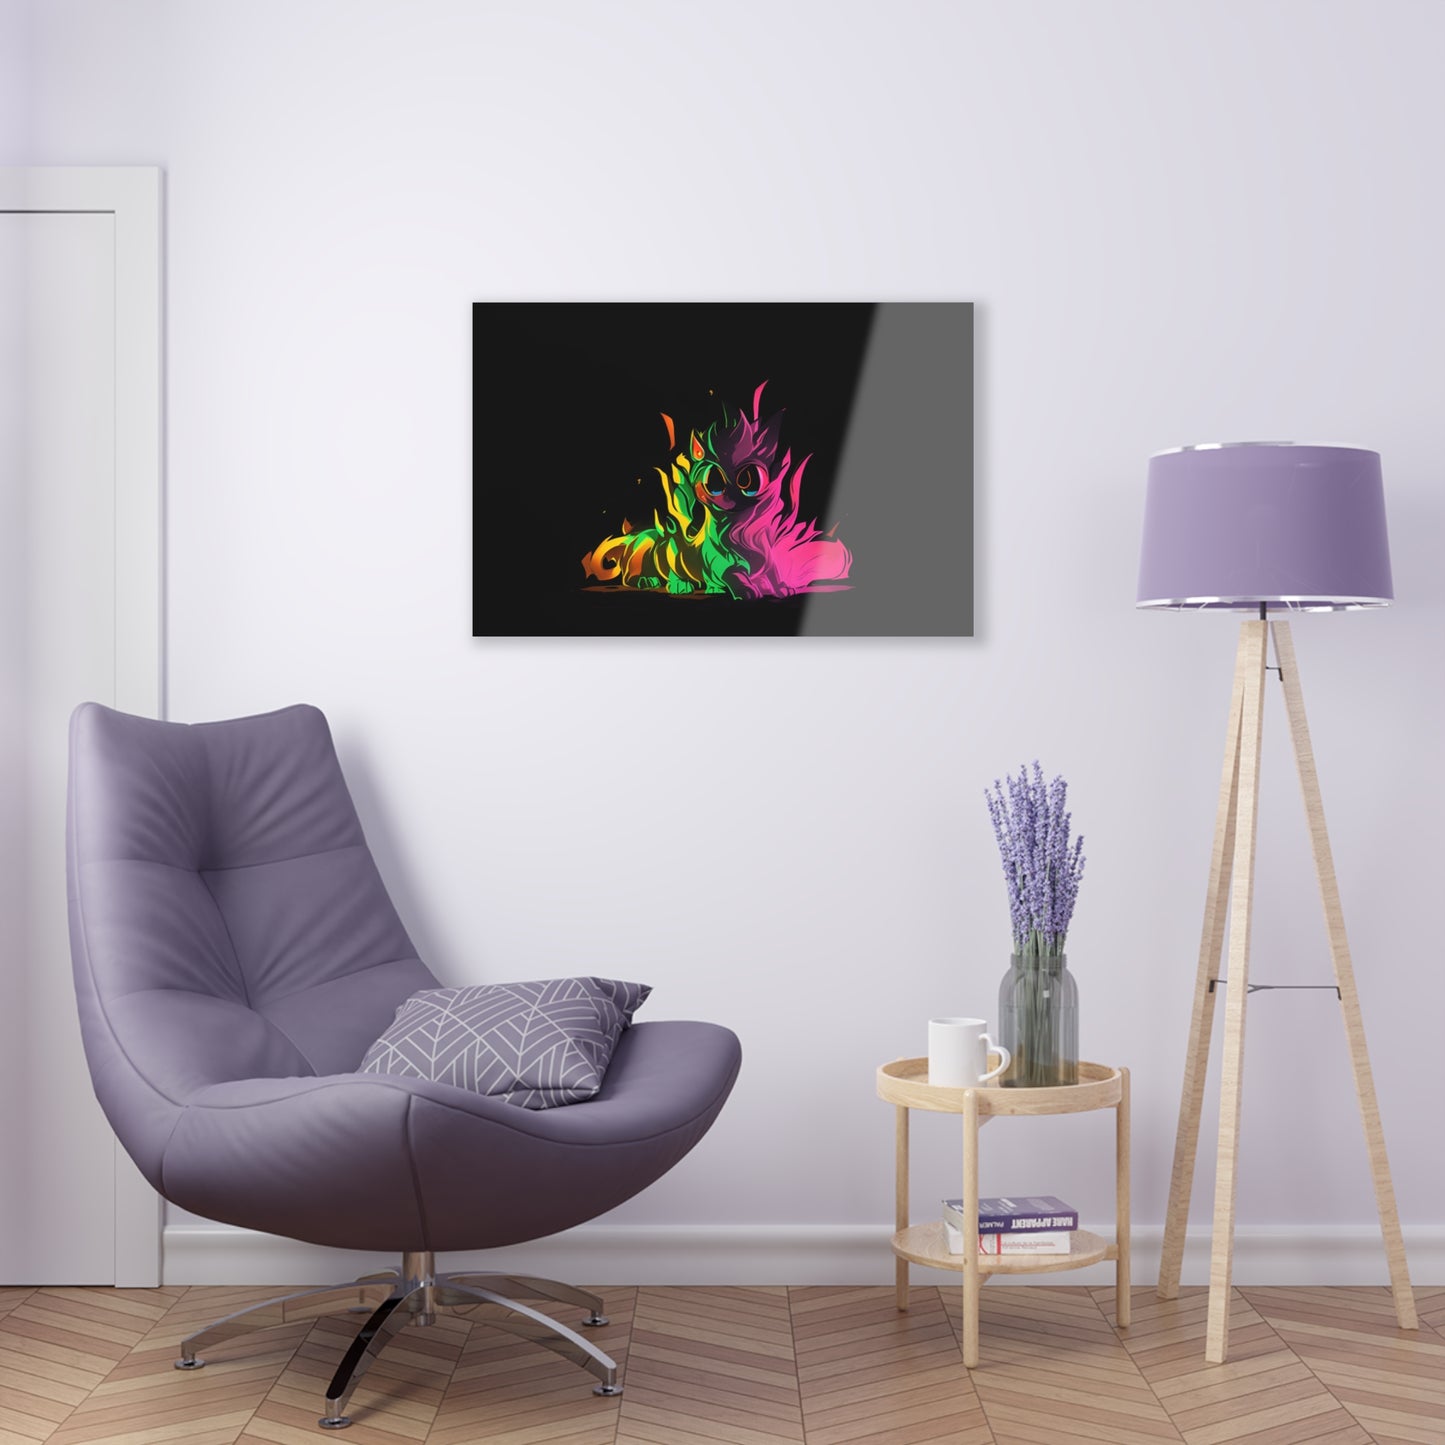 Abstracts Art on Jet Black Acrylic Panels for gameroom art gay gift for lgbtq lovers ally femme style art horizontal orientaion v6